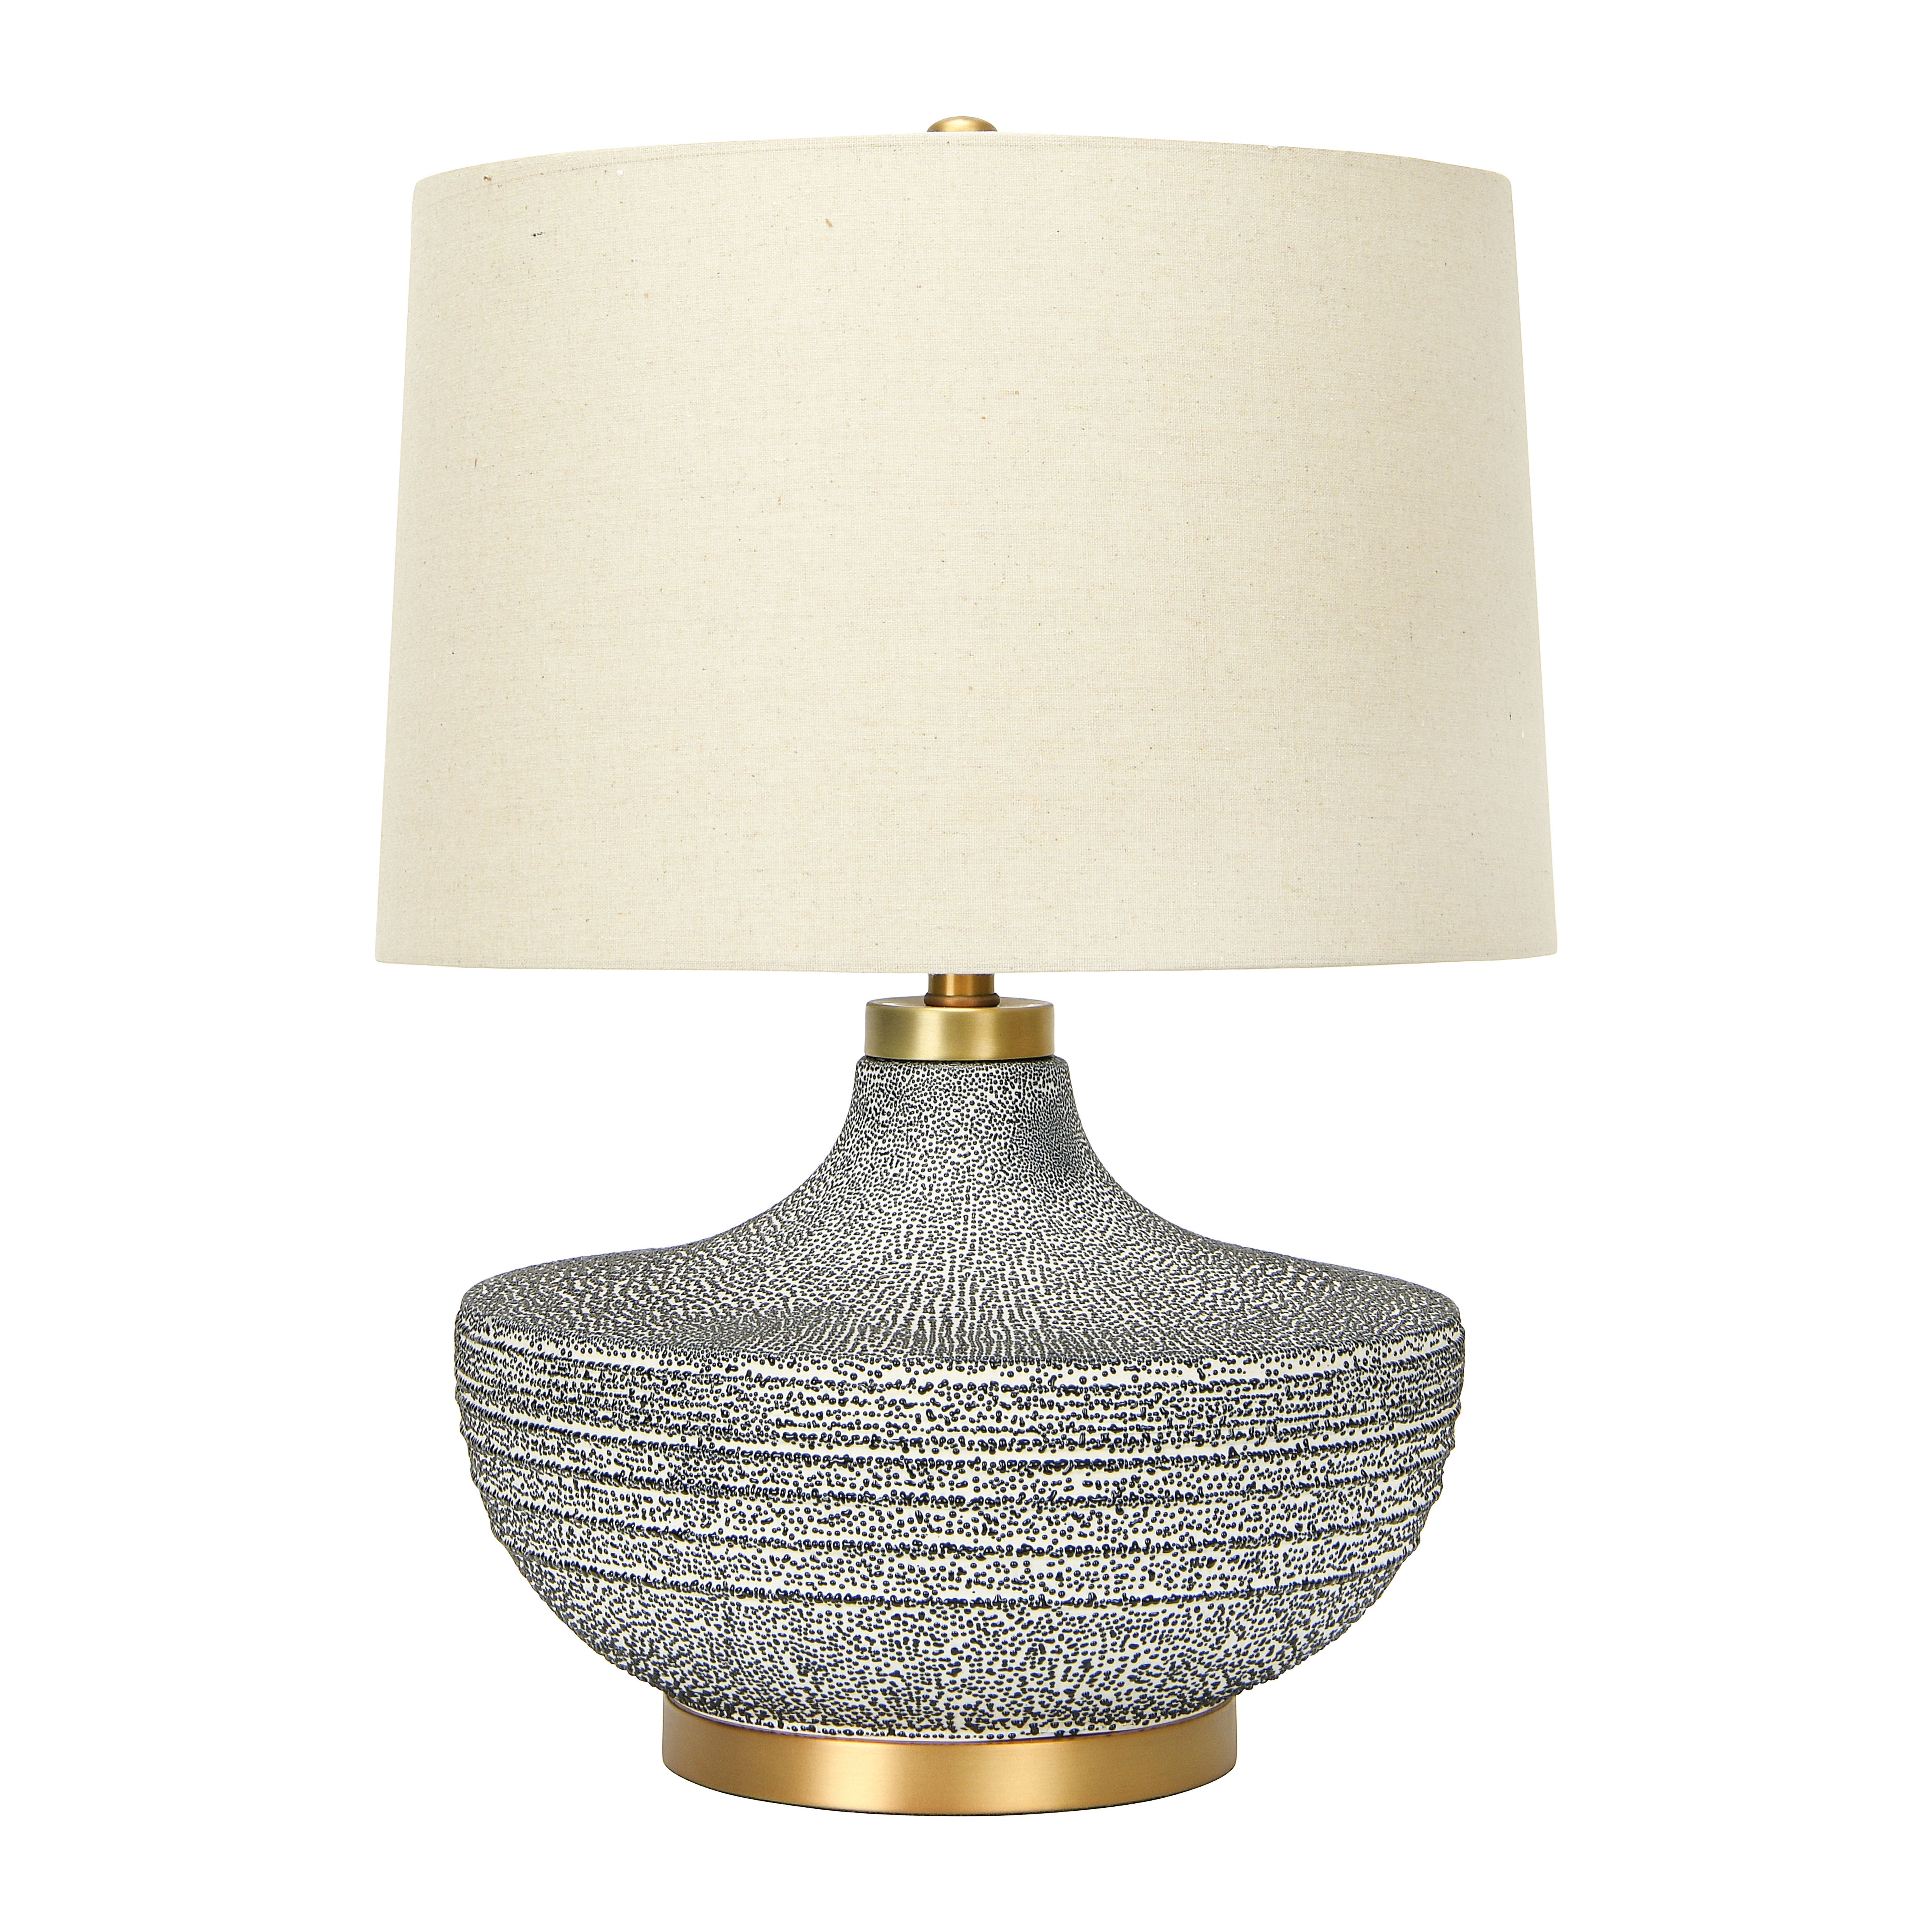 Textured Blue Glaze Ceramic Table Lamp with Natural Linen Shade - Nomad Home